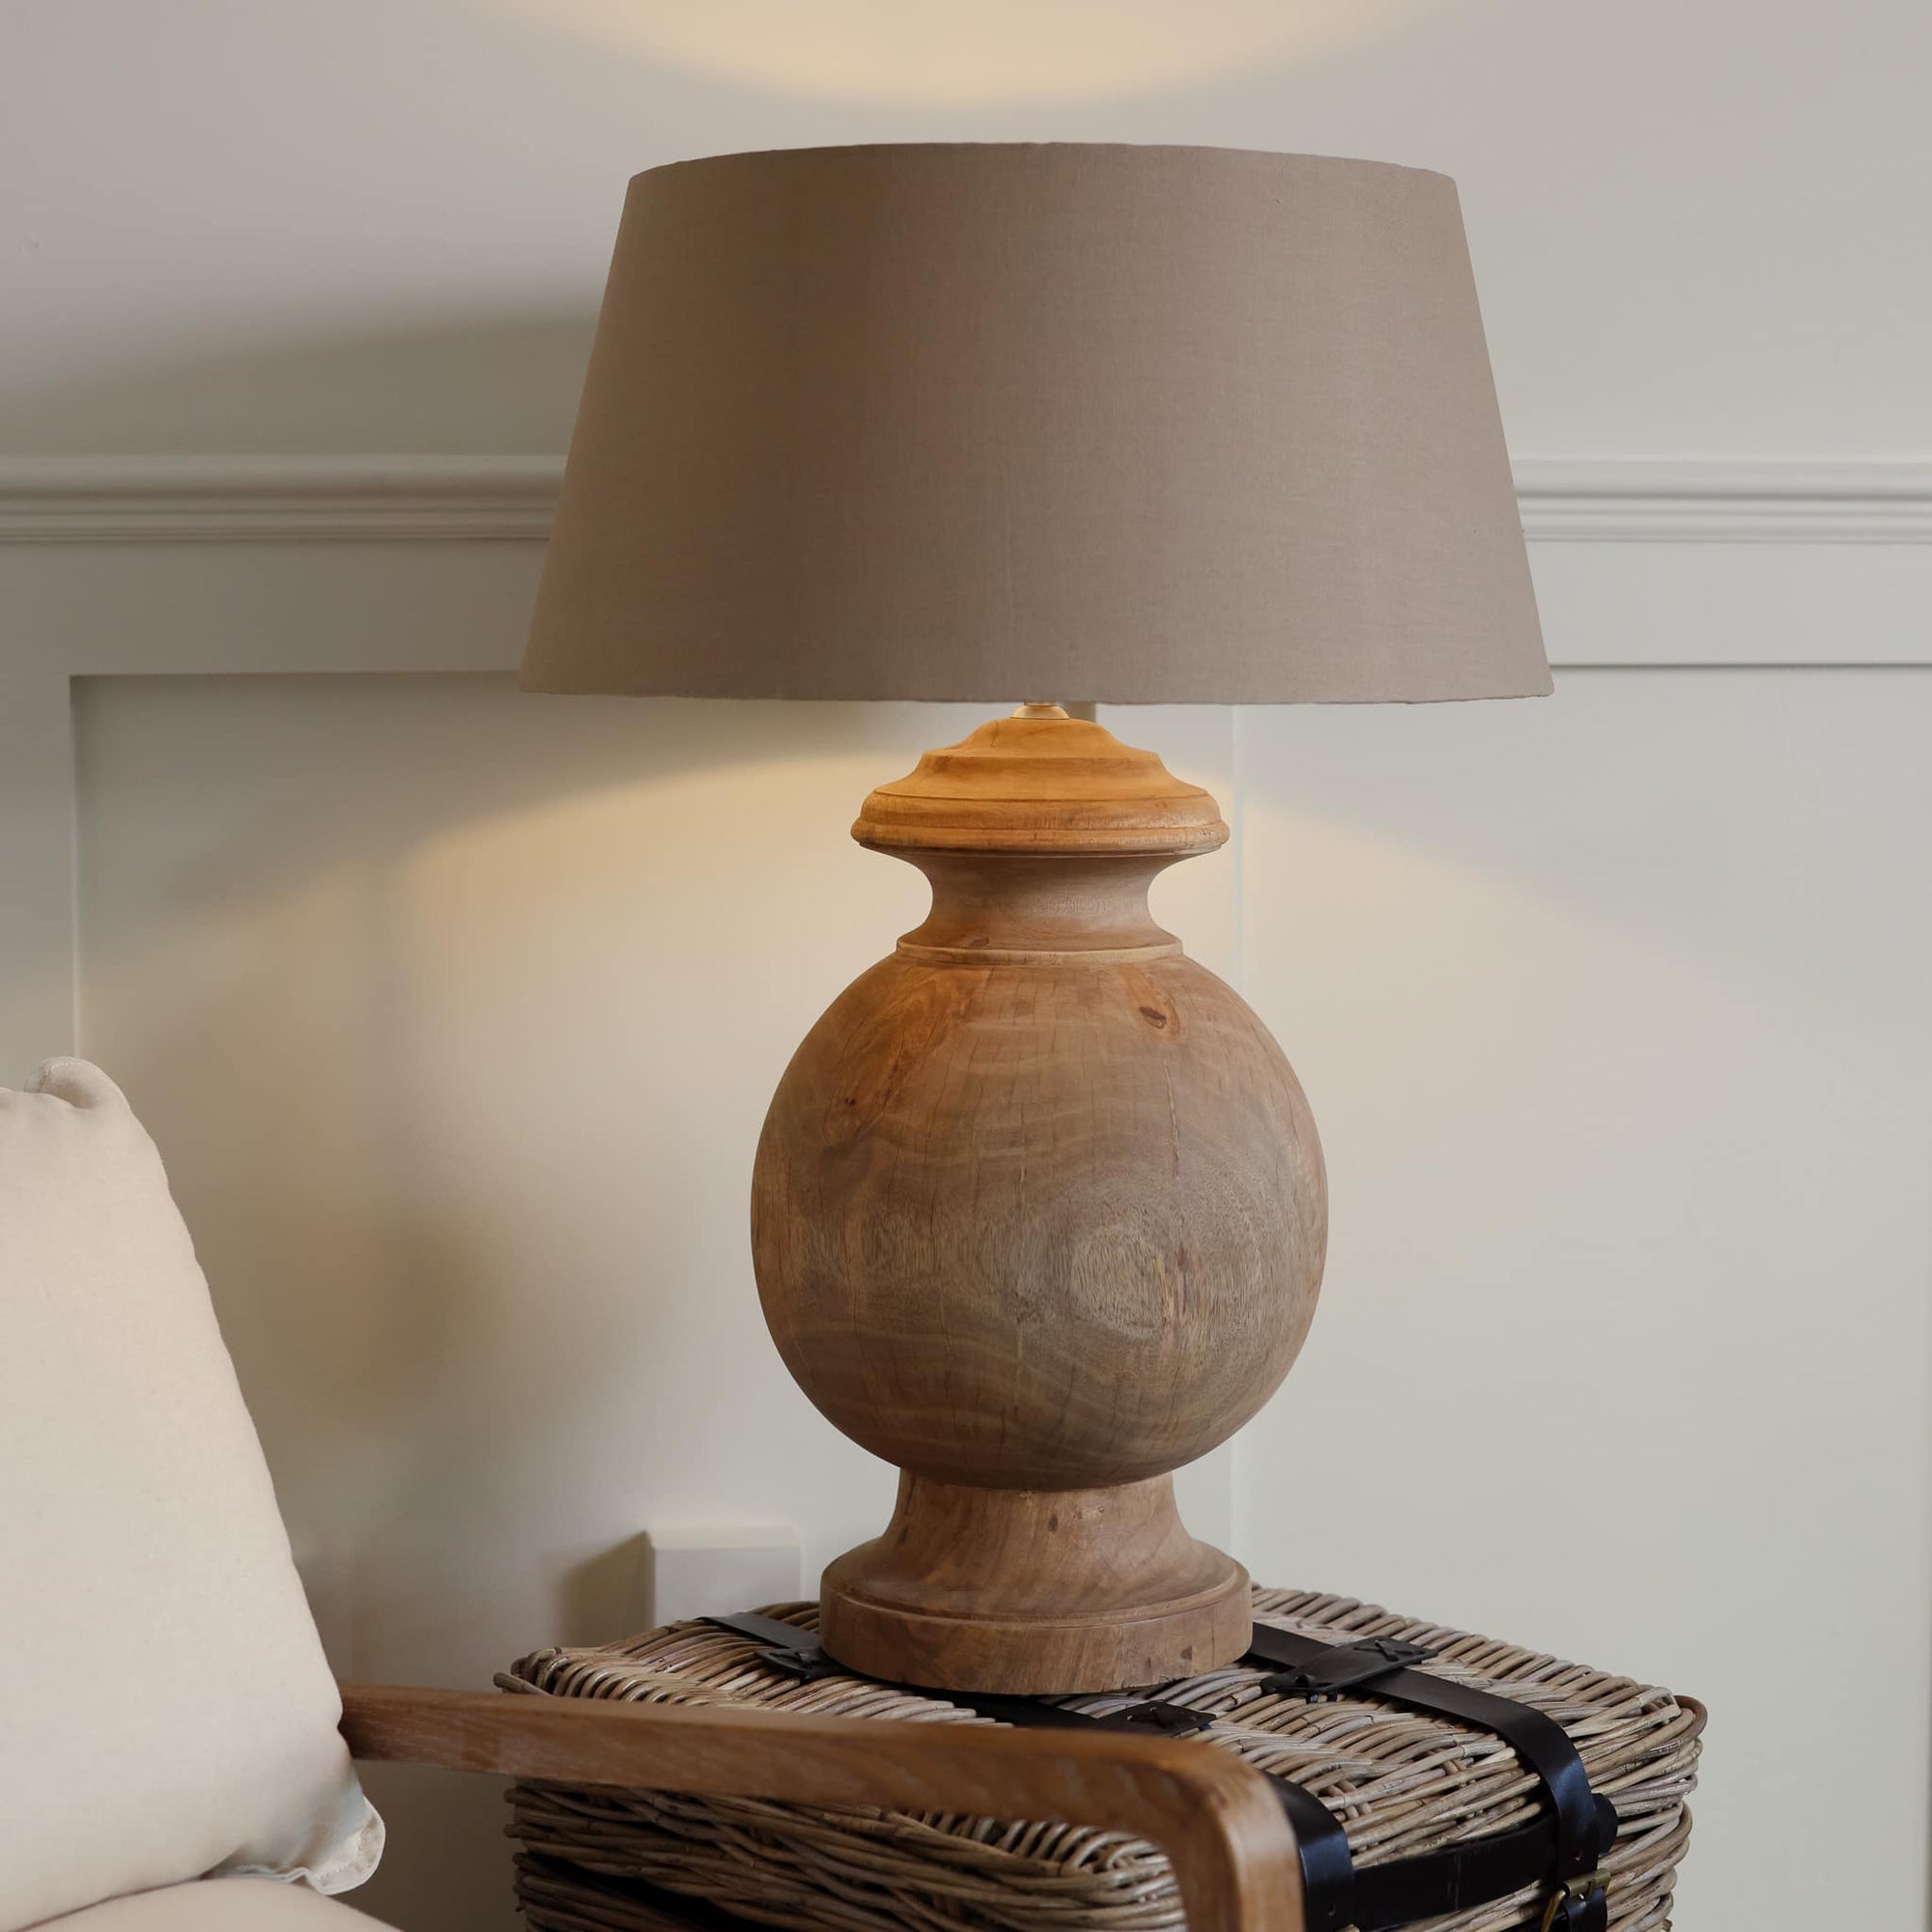 Large round wooden lamp with beige linen shade switched on, on woven side table.